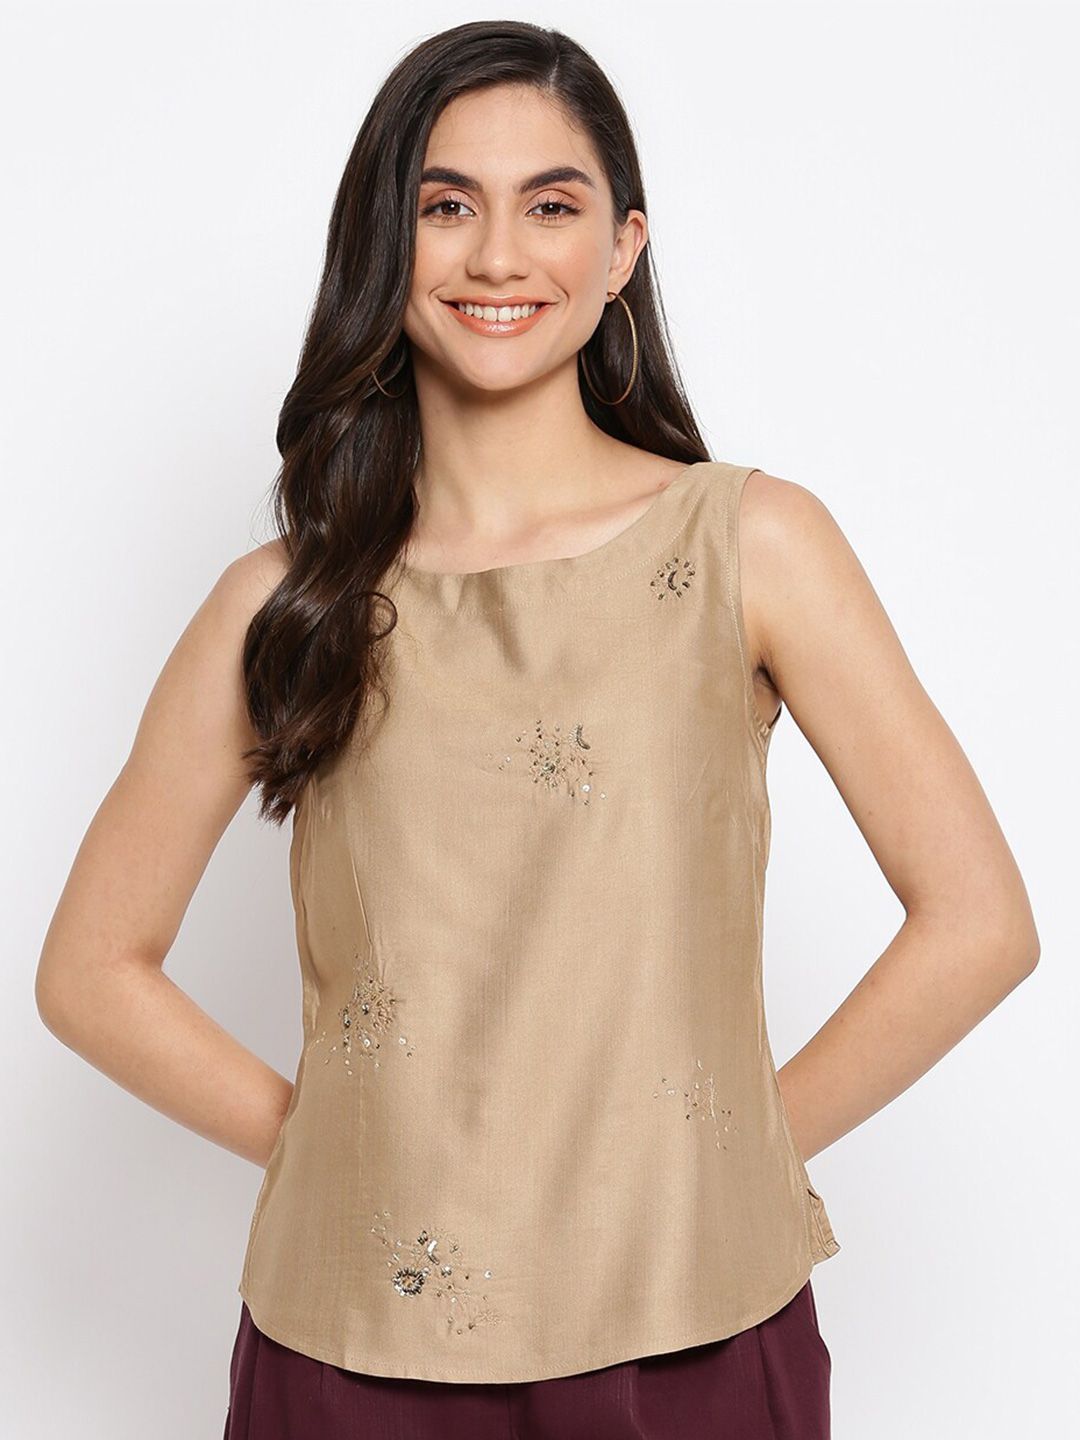 Fabindia Beige Floral Embroidered Top Price in India